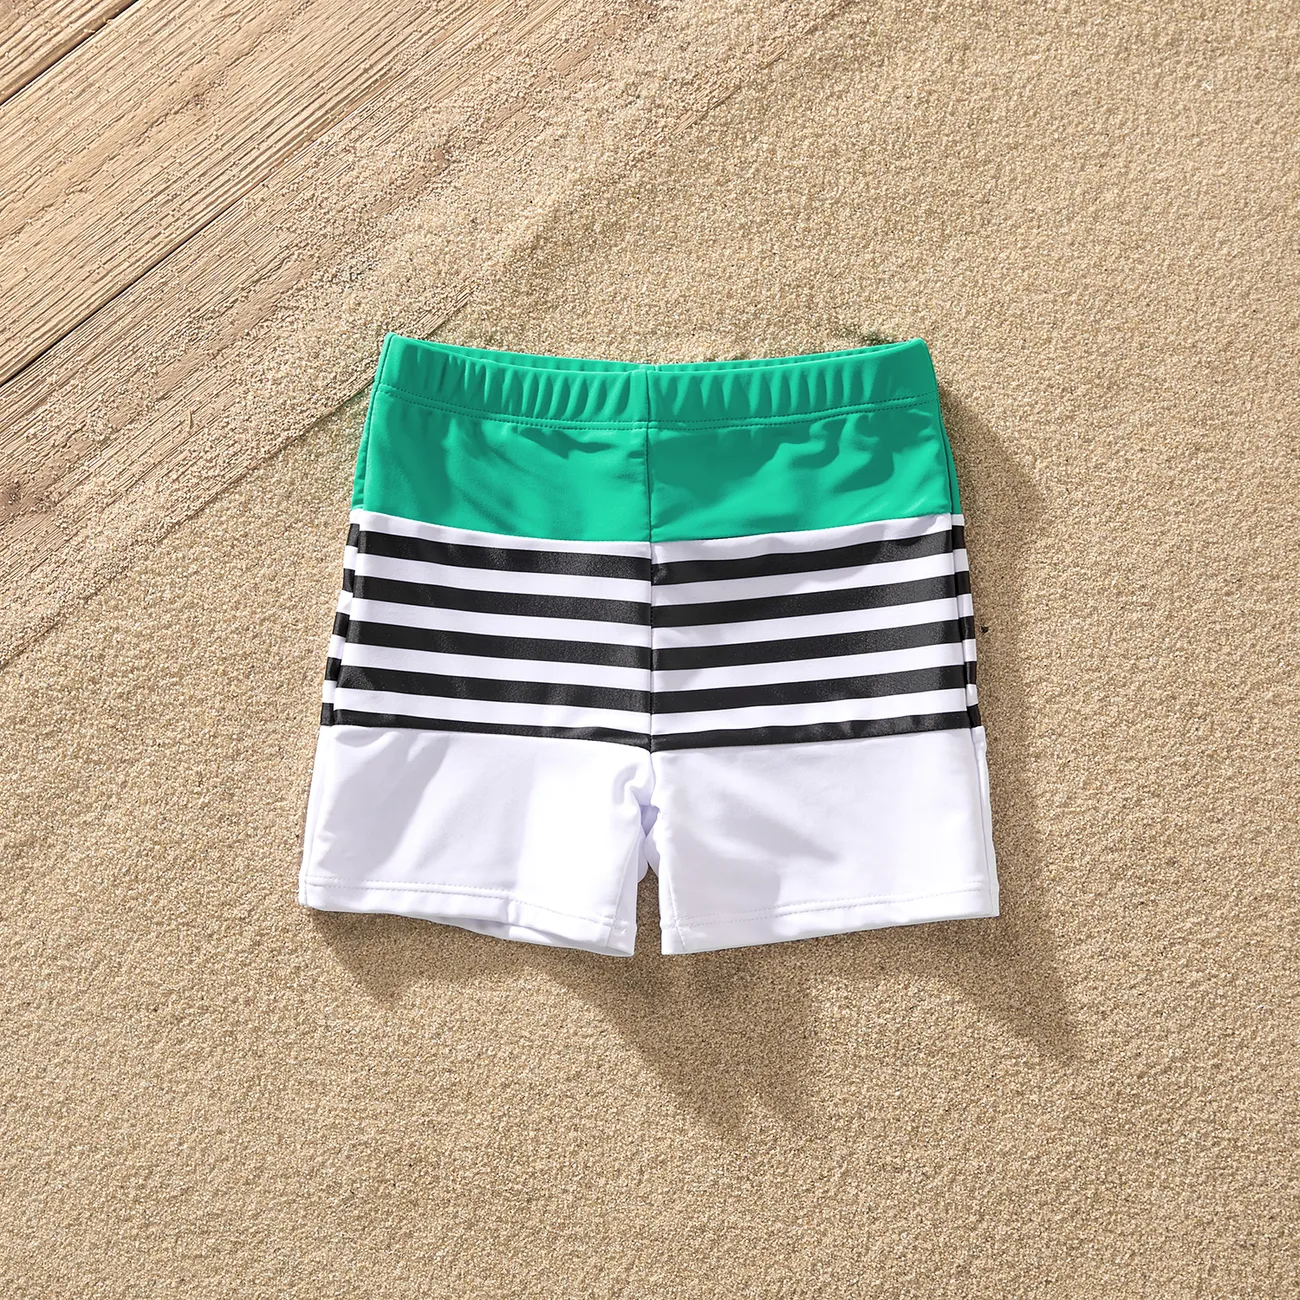 Family Matching Two Tone One-piece Swimsuit or Stripe Panel Swim Trunks Shorts  big image 1